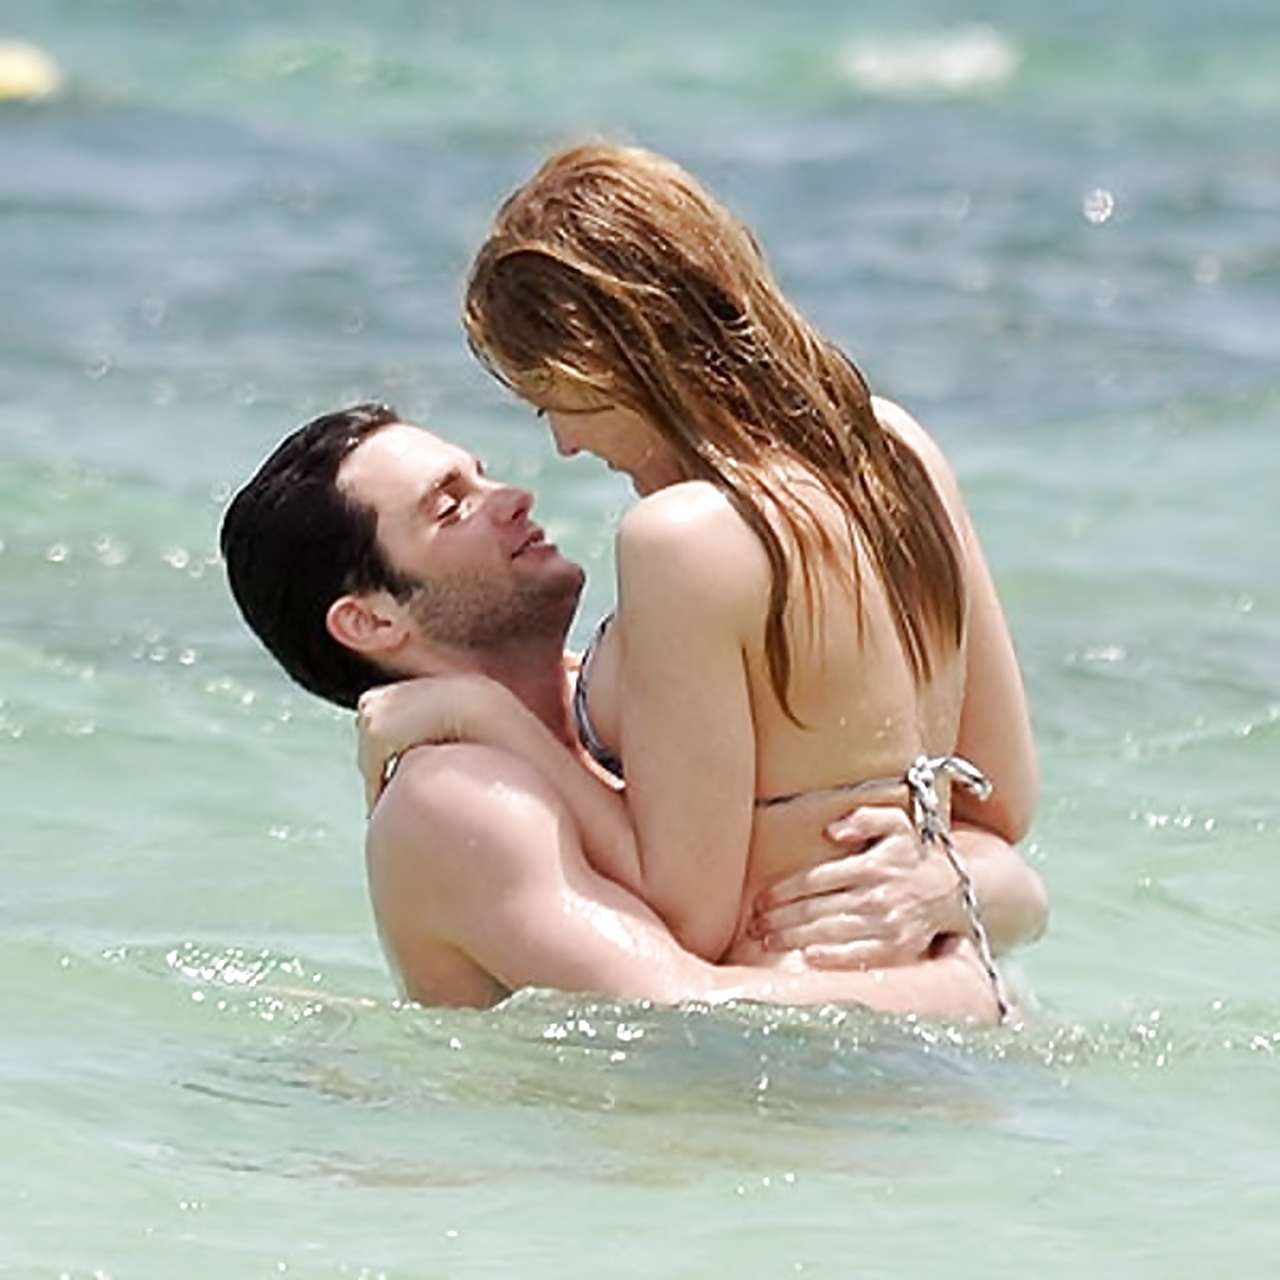 Blake Lively nipple slip and sexy in bikini on beach paparazzi pictures and show #75301178